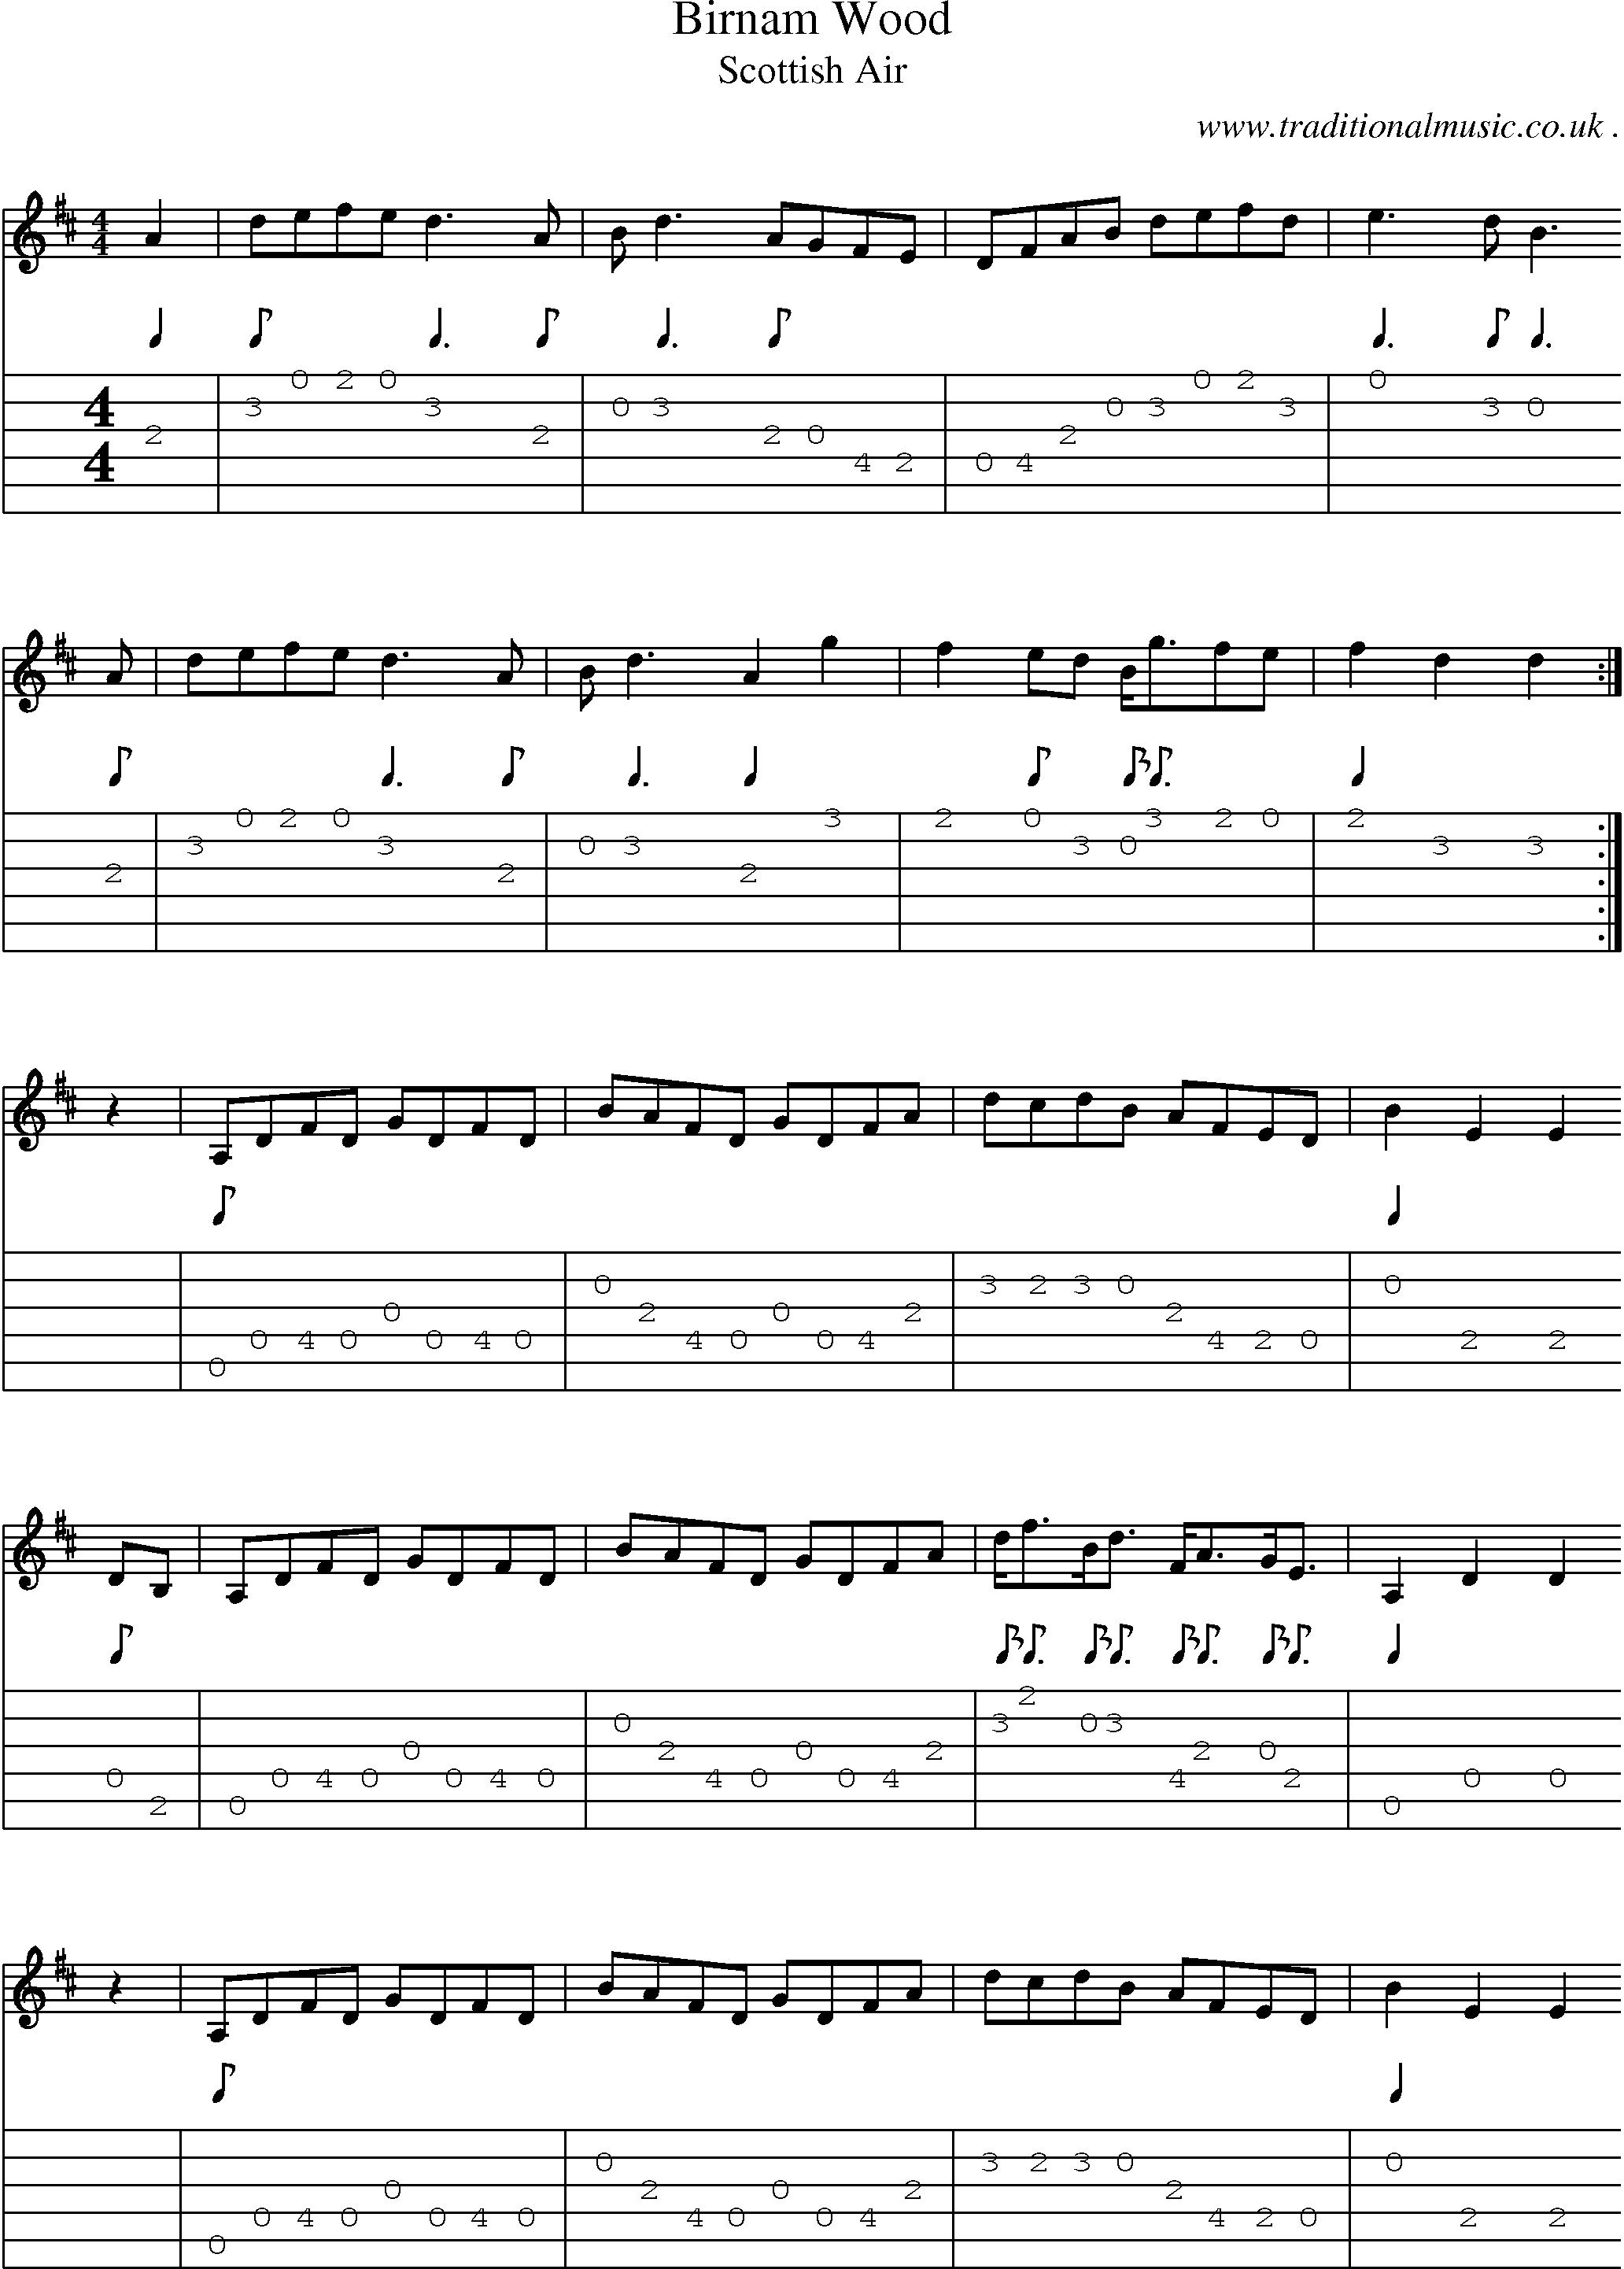 Sheet-music  score, Chords and Guitar Tabs for Birnam Wood